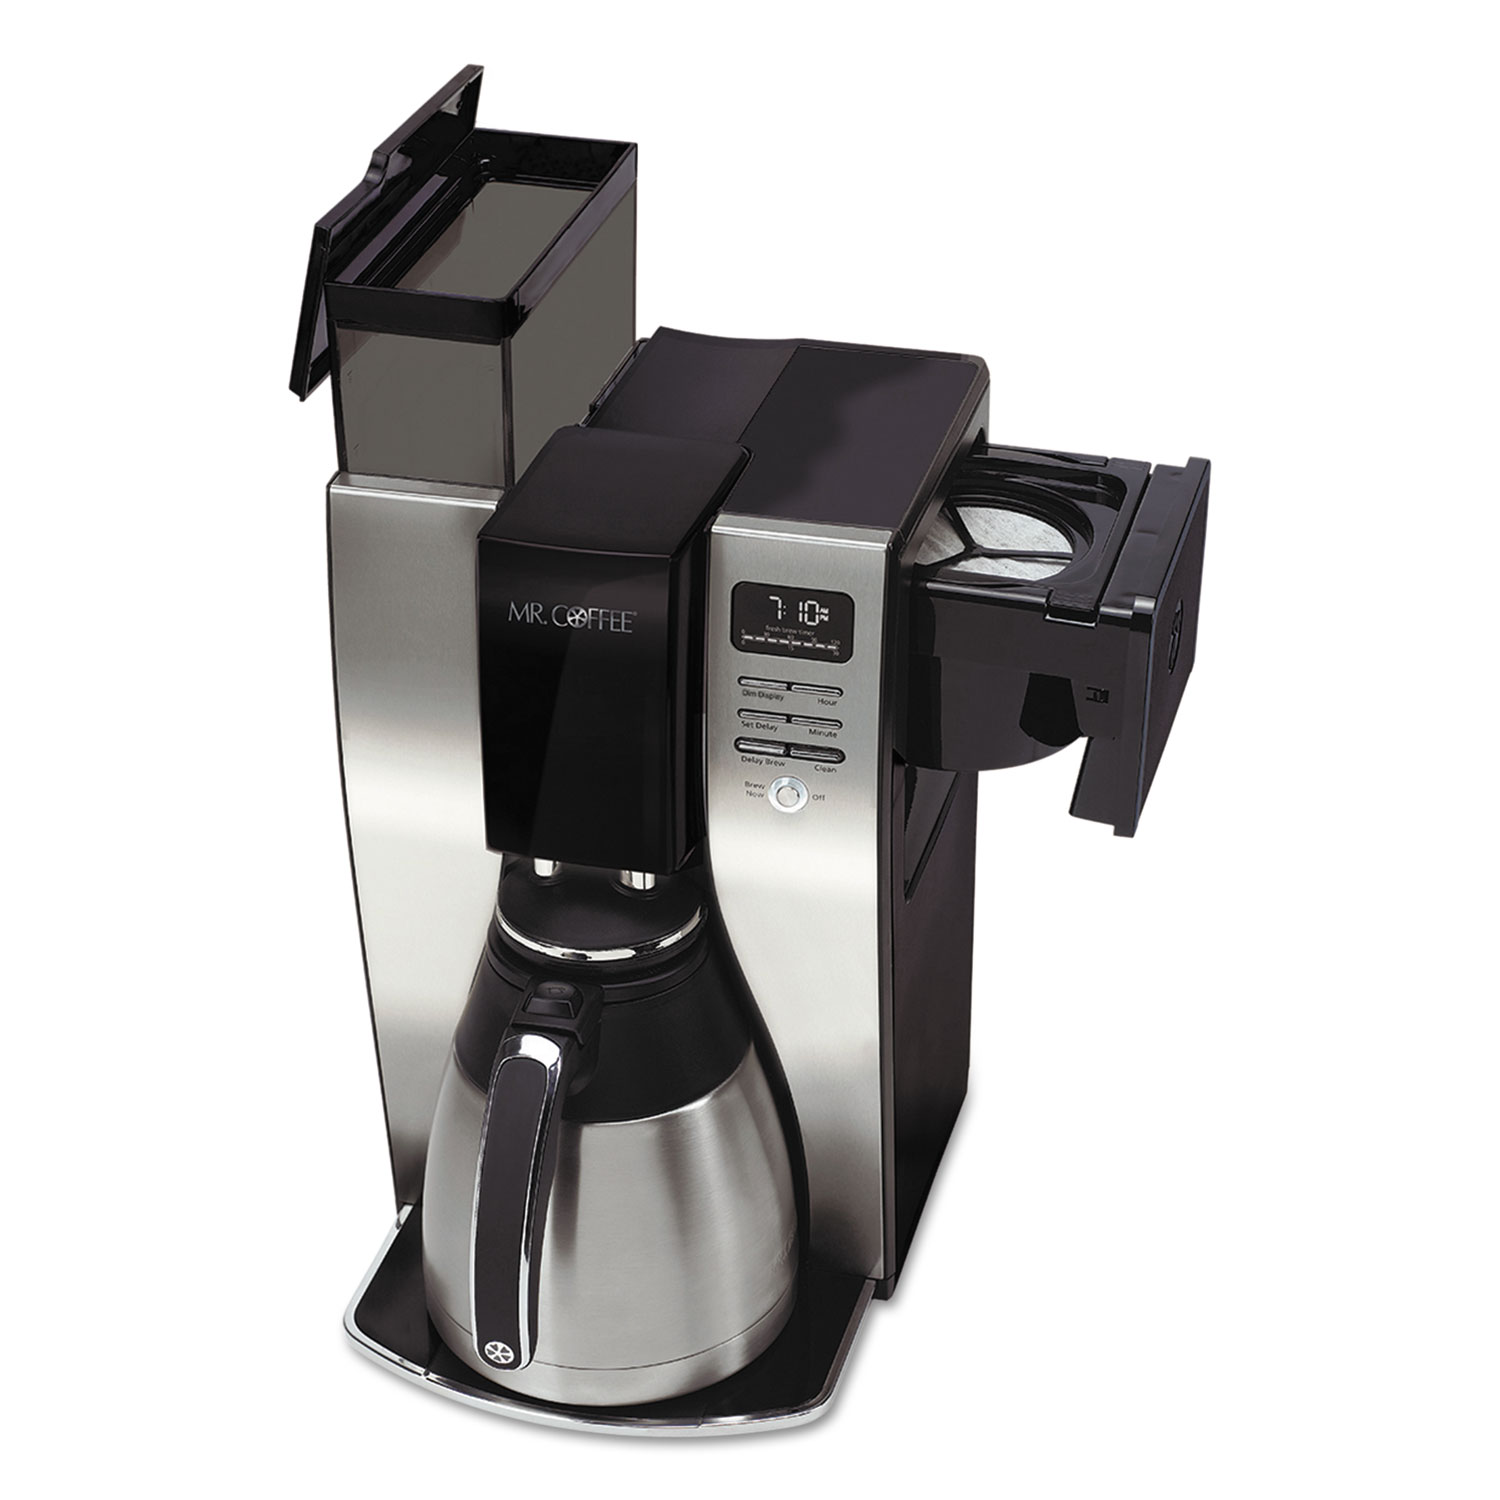 Mr. Coffee Stainless Steel 10 Cup Programmable Coffee Maker - image 1 of 5